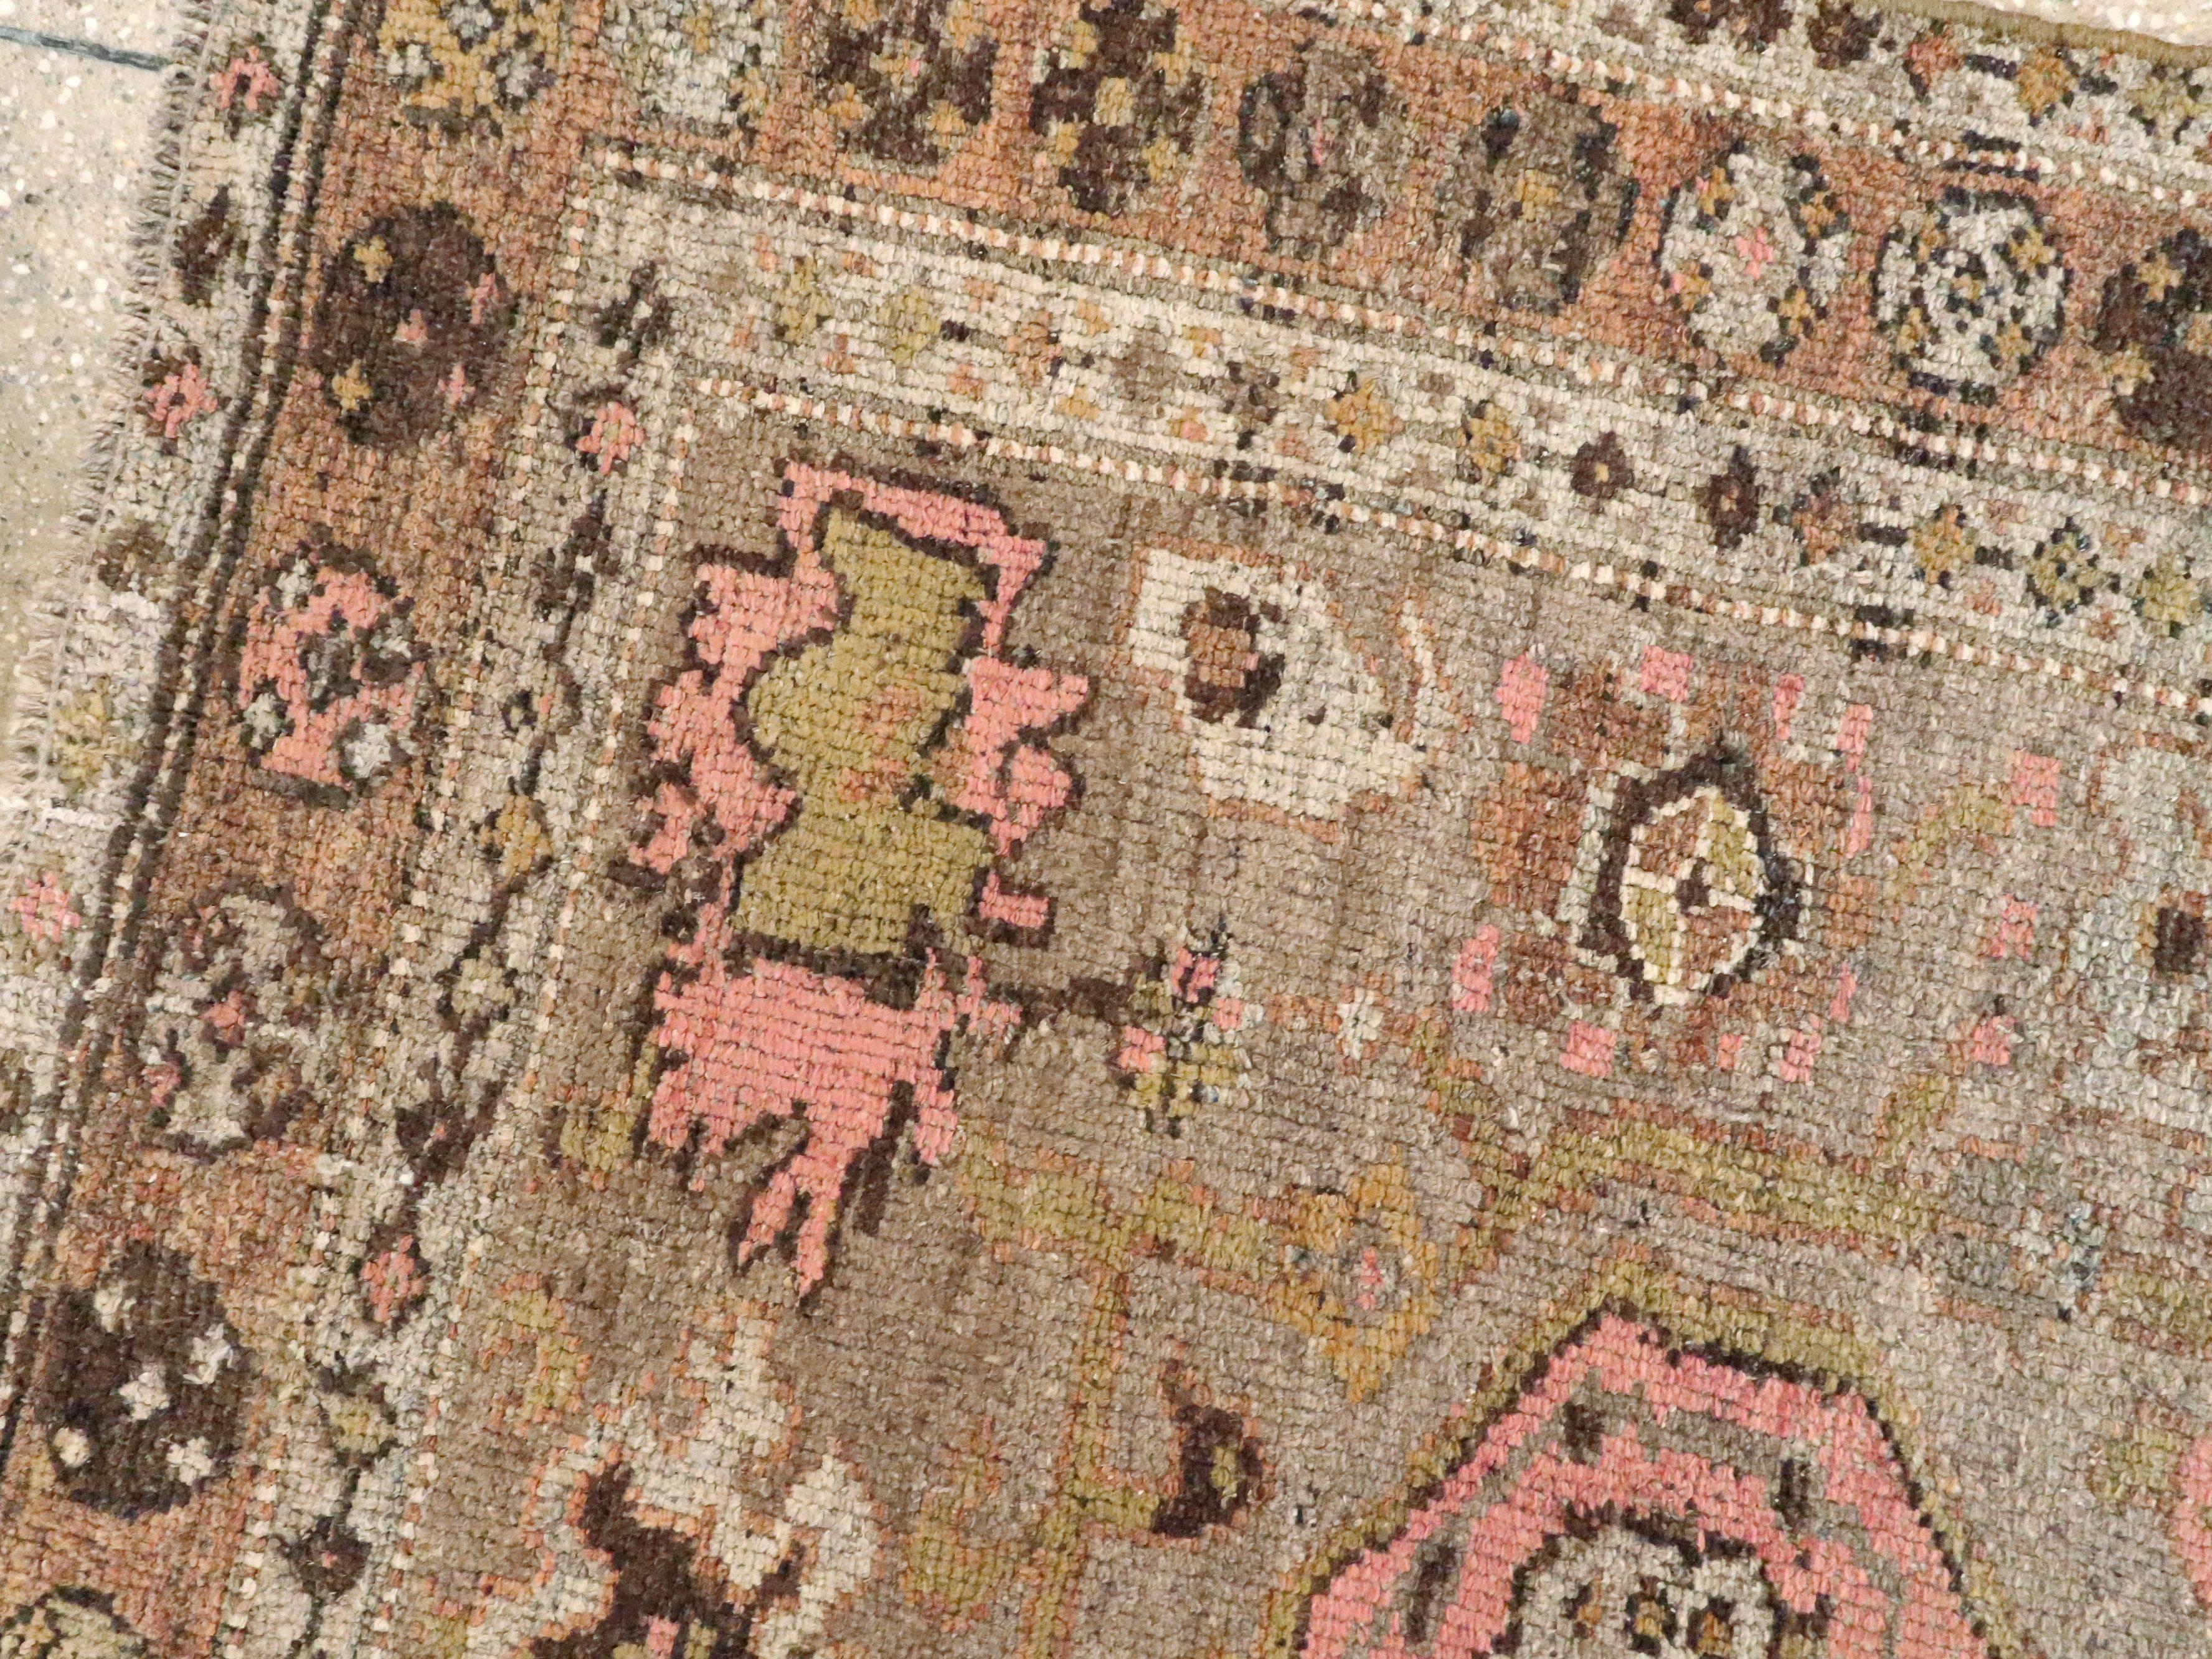 Wool Antique Persian Kurd Rug For Sale